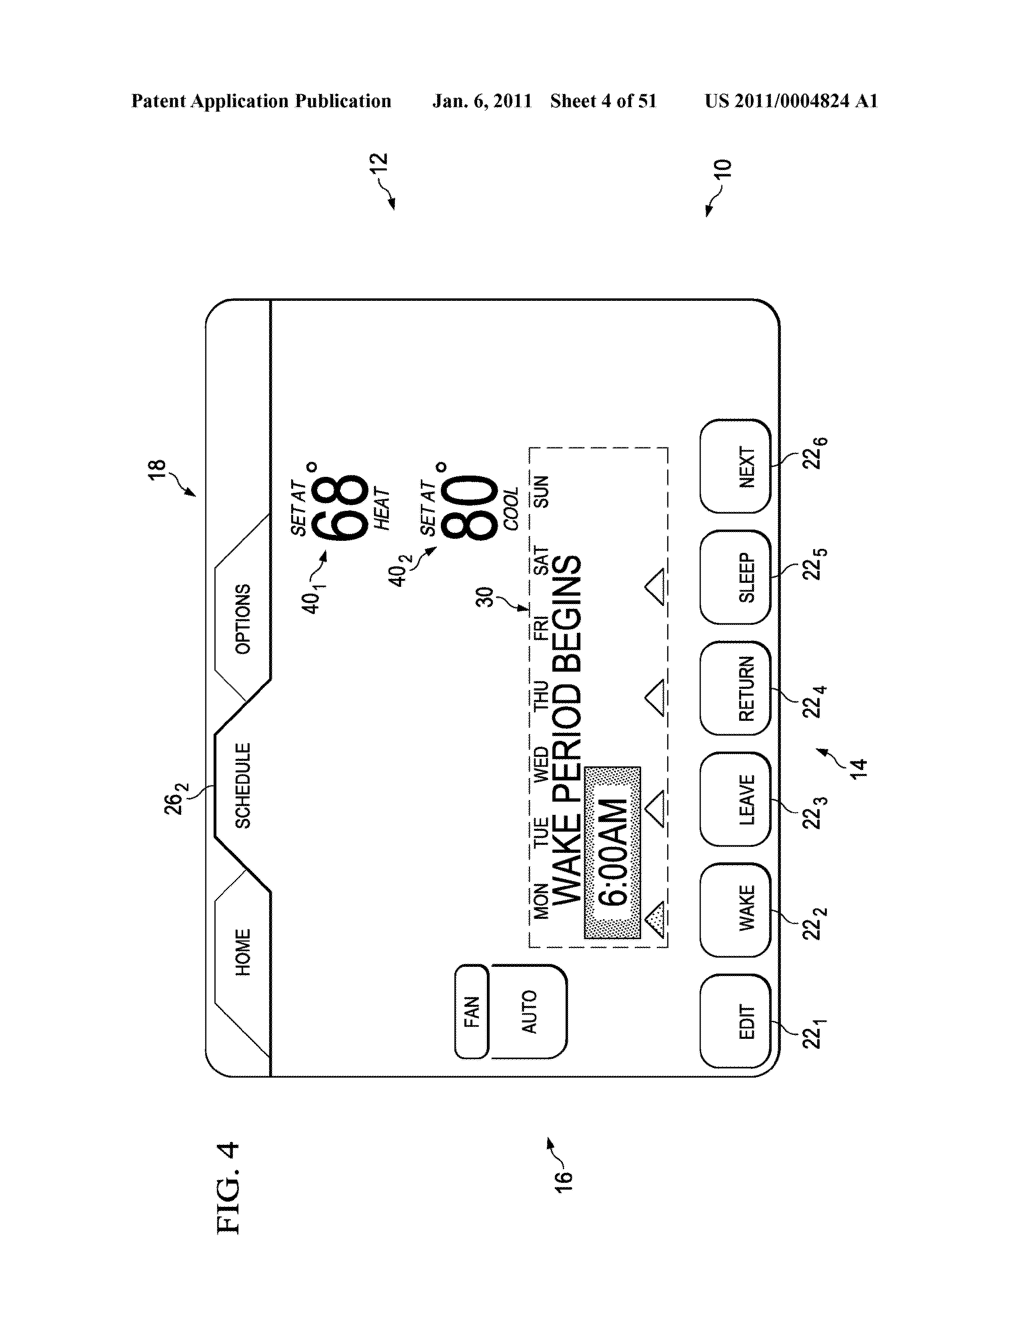 DISPLAY APPARATUS AND METHOD HAVING TEXTUAL SYSTEM STATUS MESSAGE DISPLAY CAPABILITY FOR AN ENVIROMENTAL CONTROL SYSTEM - diagram, schematic, and image 05